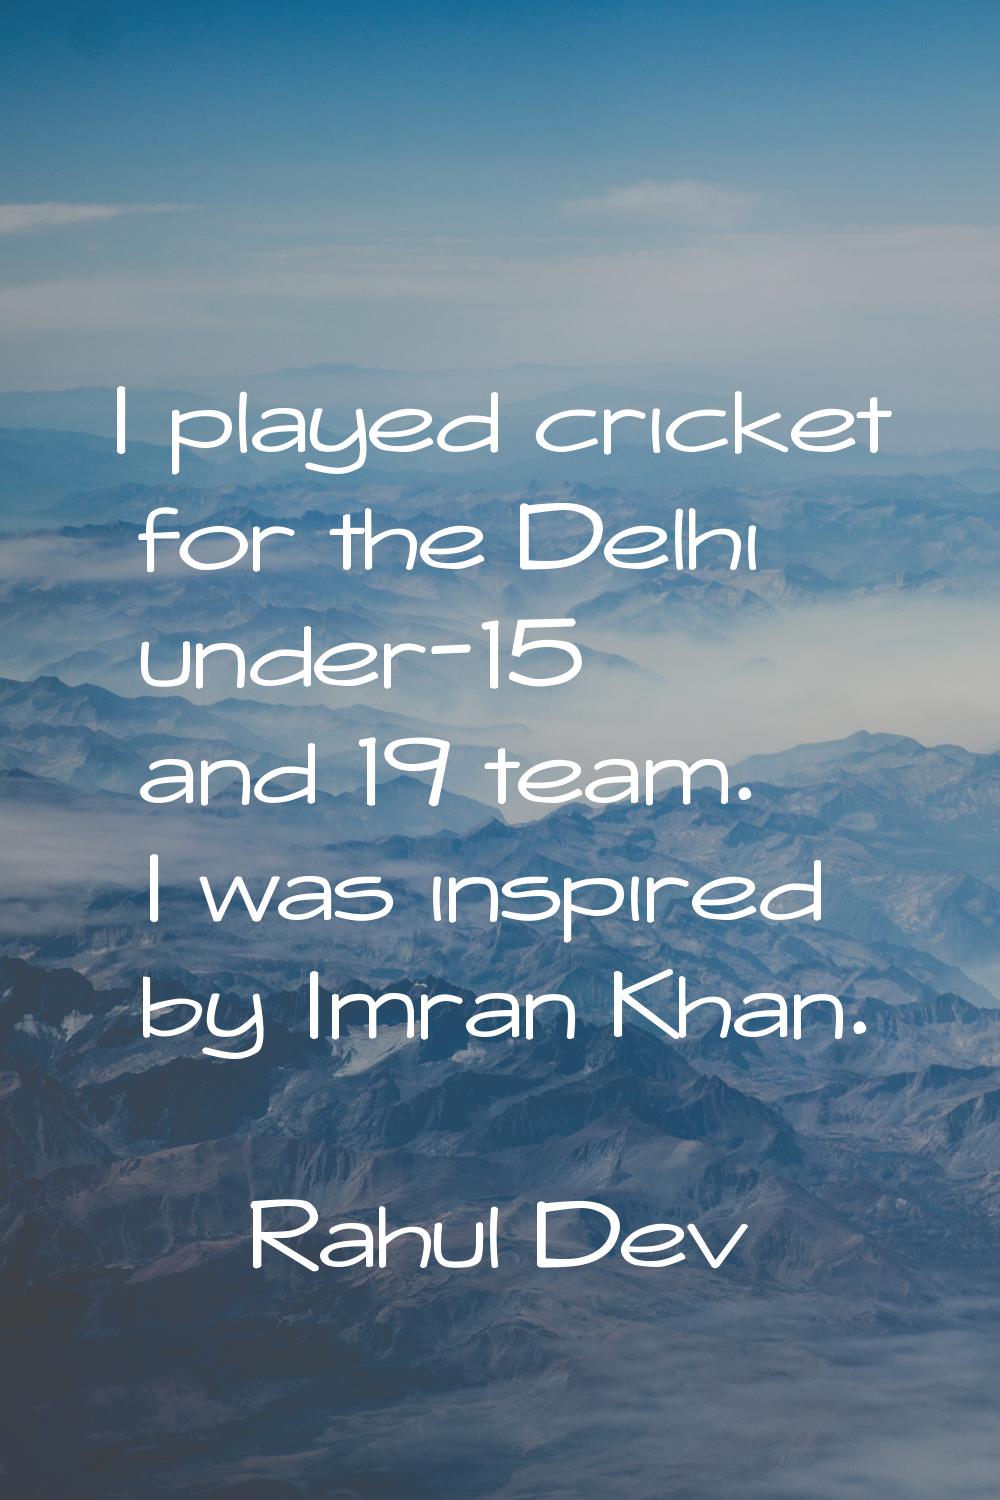 I played cricket for the Delhi under-15 and 19 team. I was inspired by Imran Khan.